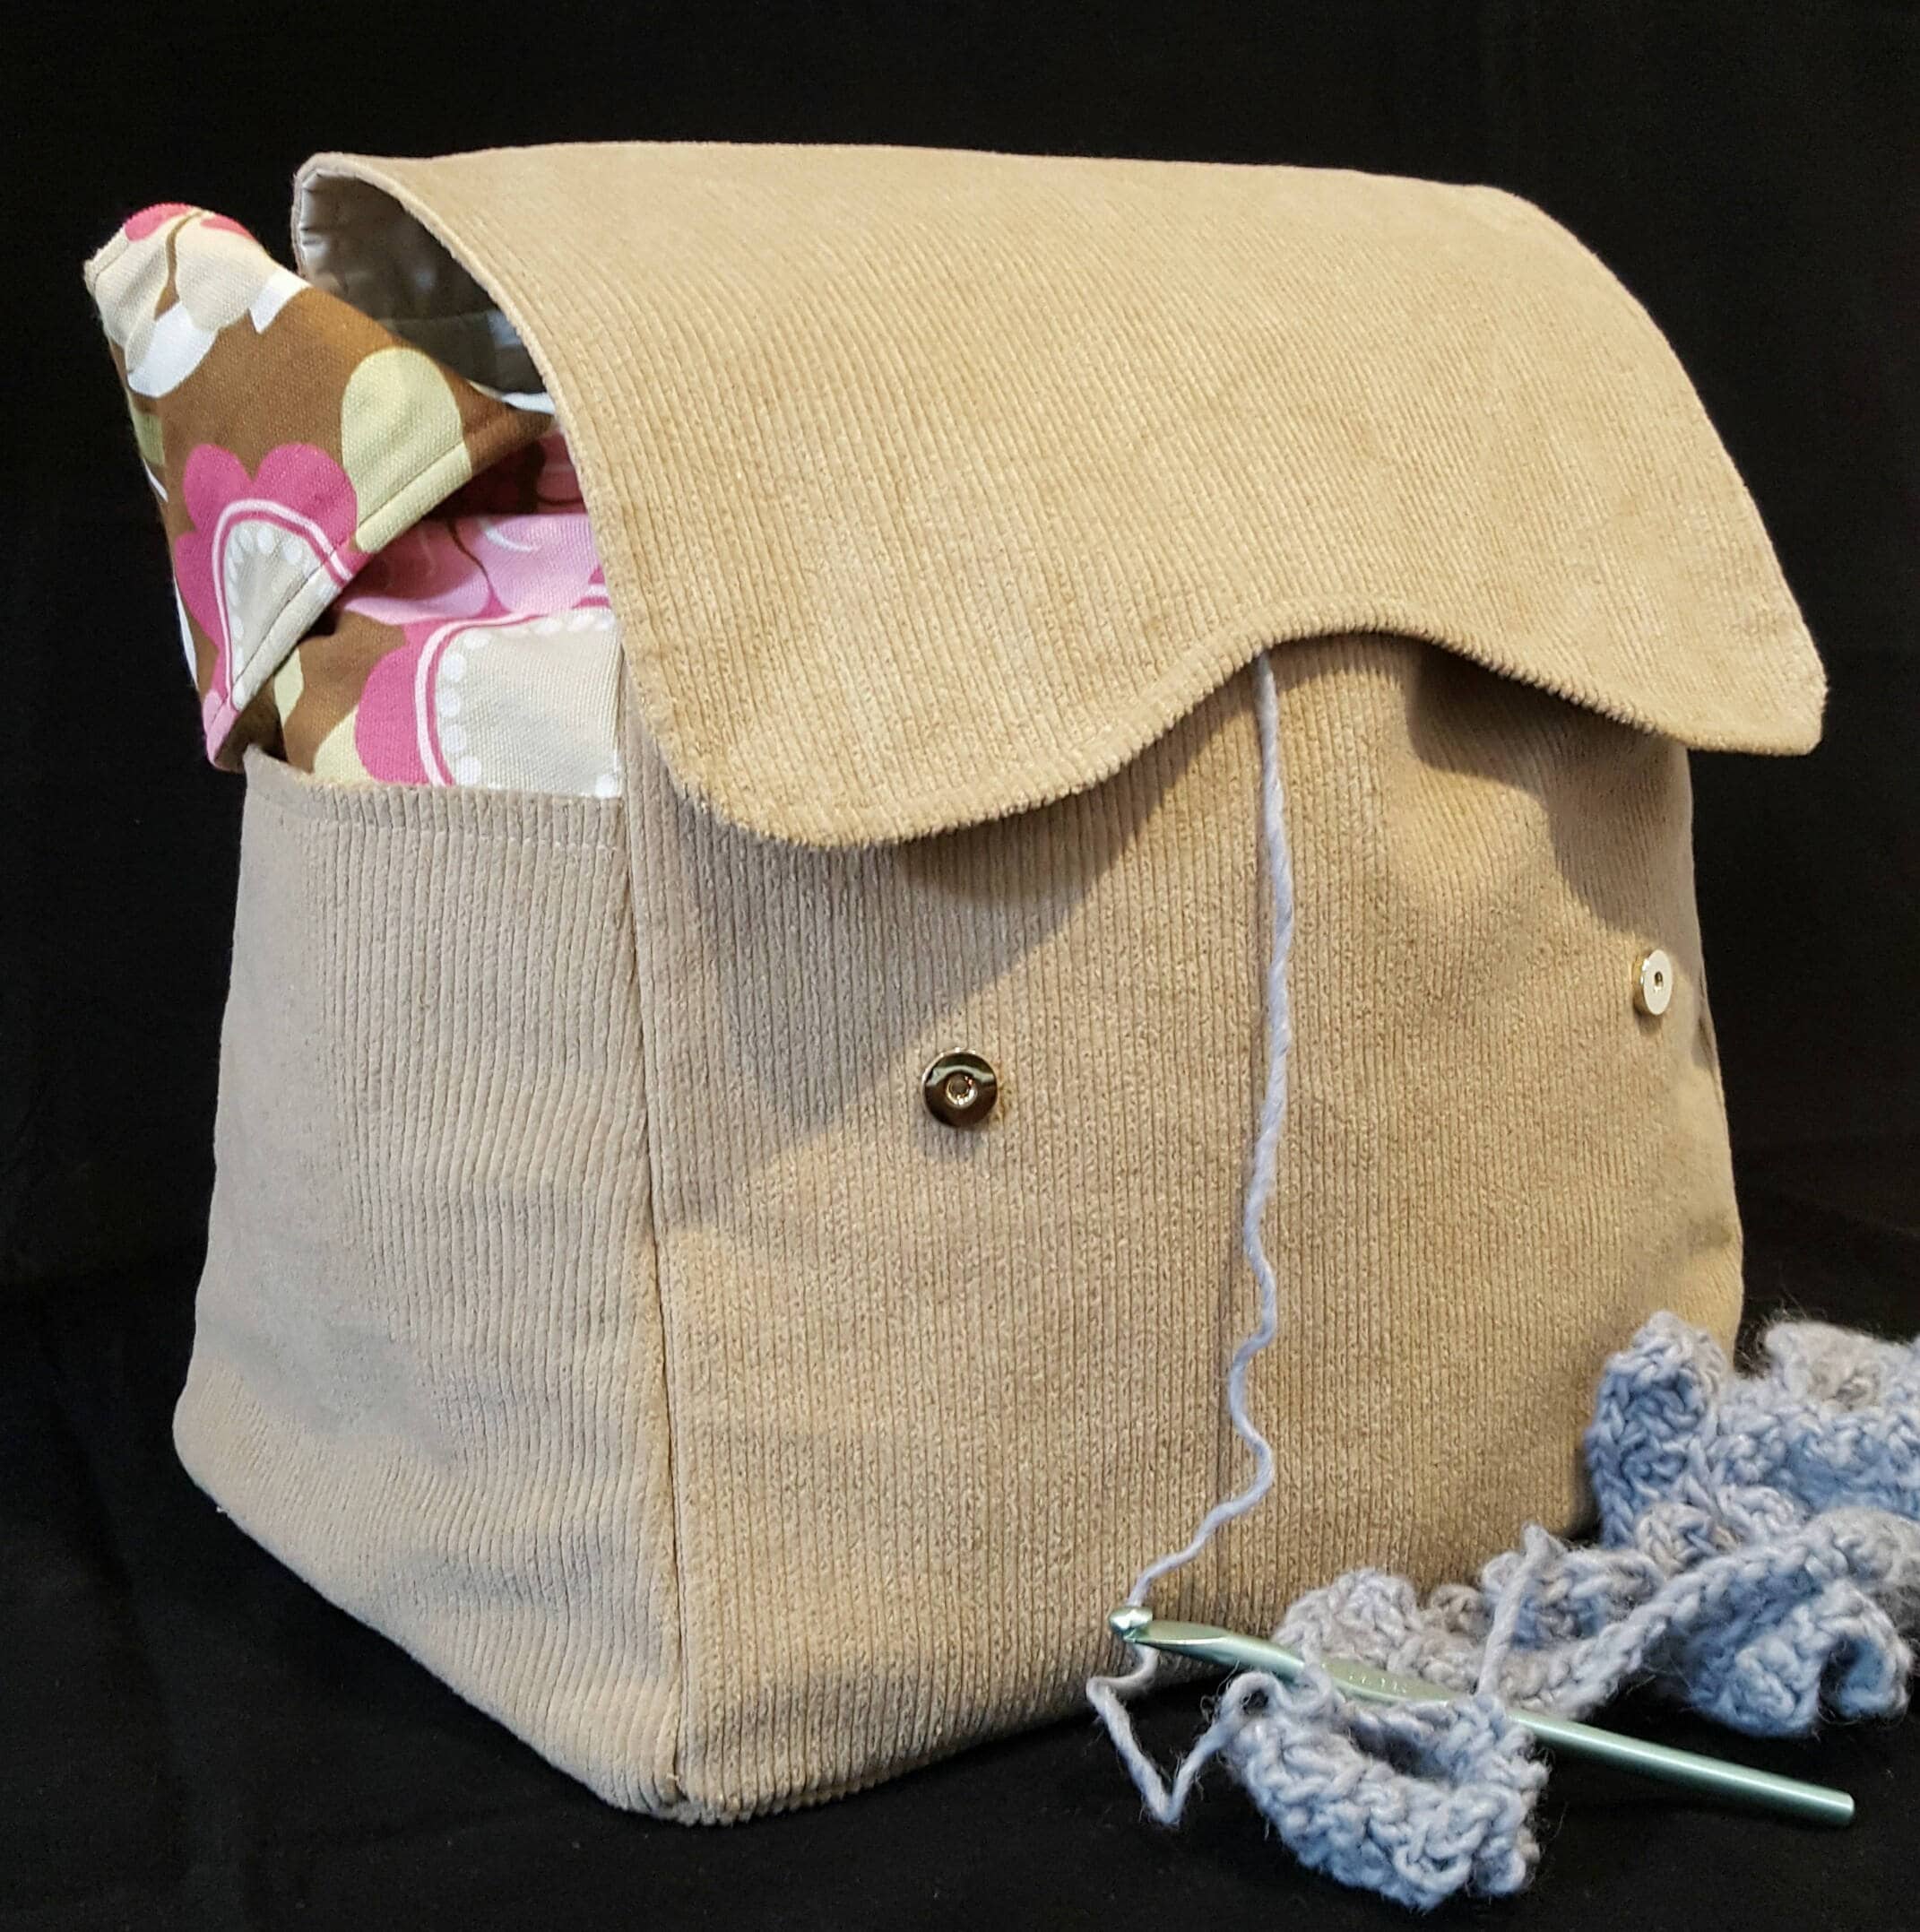 knitting project canvas bag